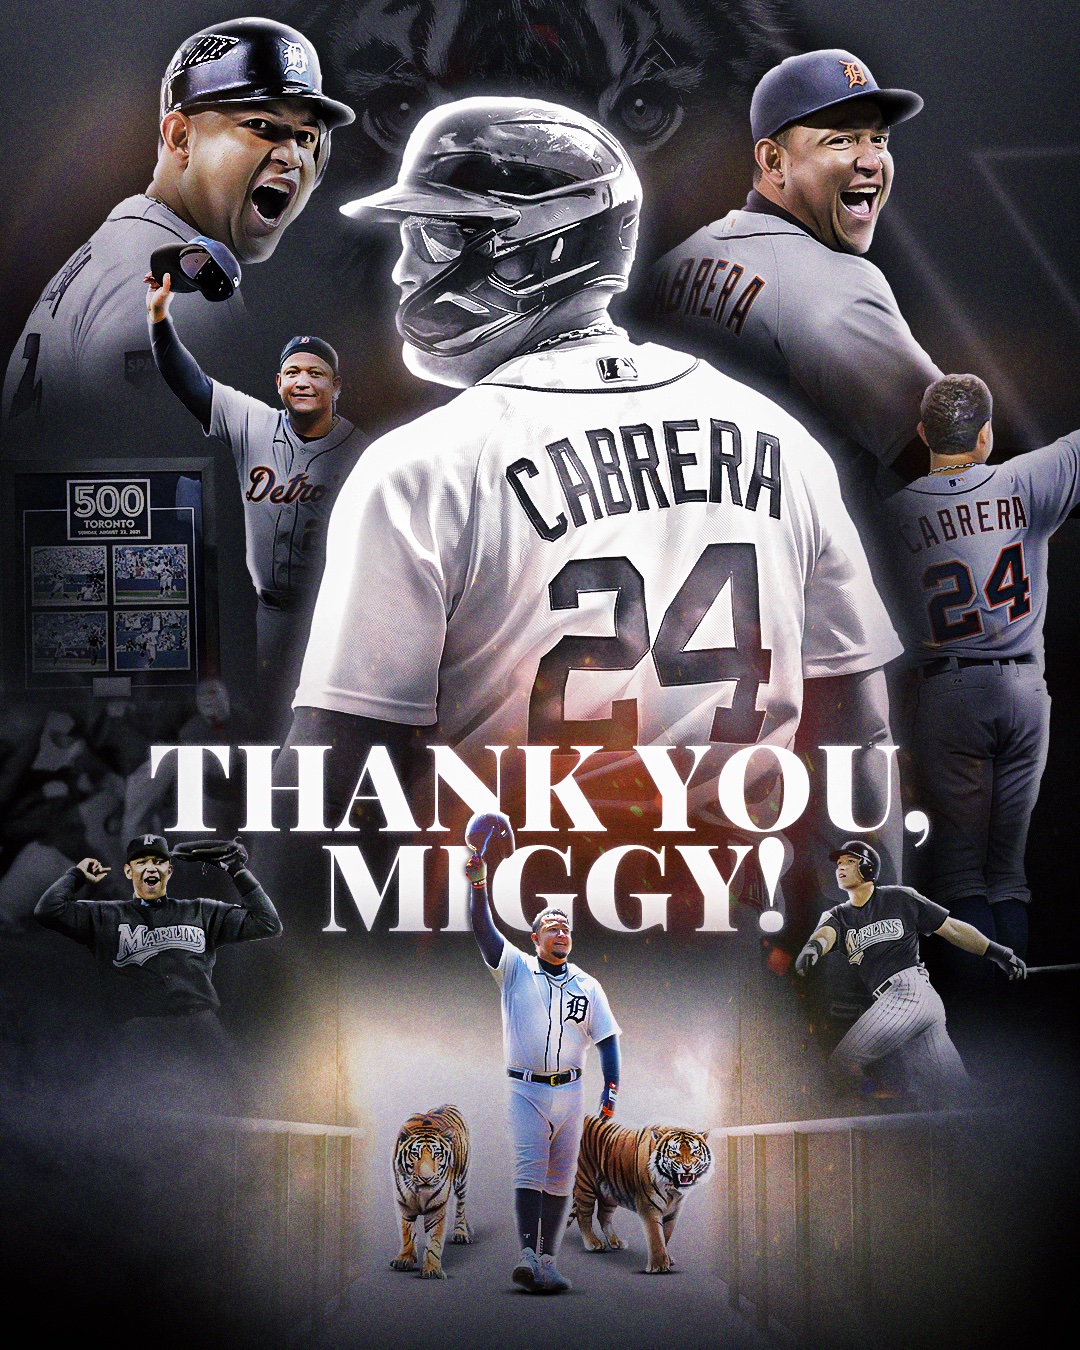 MLB on X: Gracias, Miggy. We'll never forget watching you play